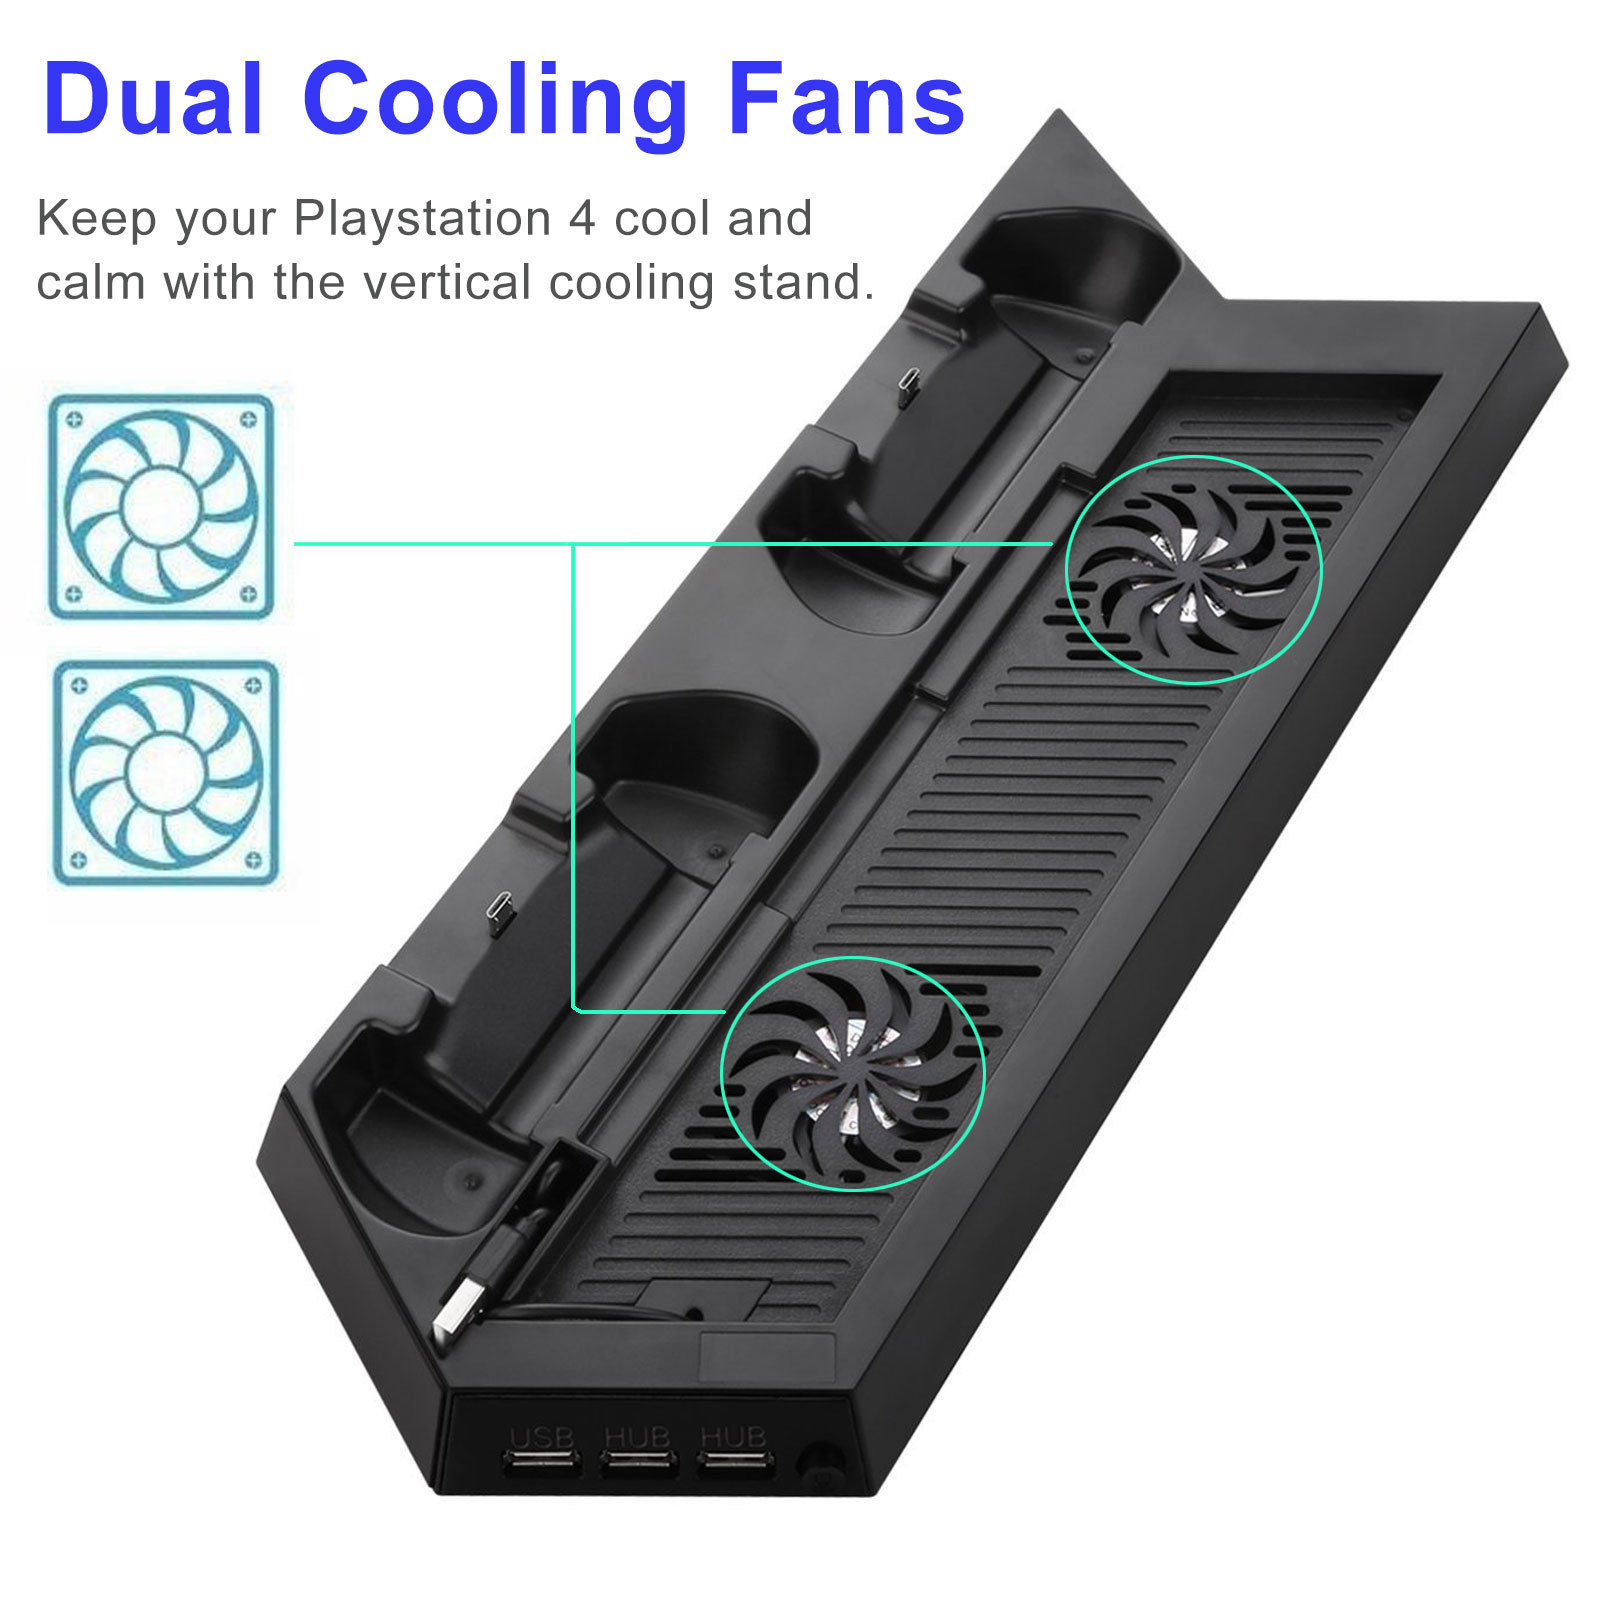 PS4 Cooling Station Vertical Stand with 2 Controller Charging Dock, Black (Not for PS4 Slim/Pro) - image 4 of 9